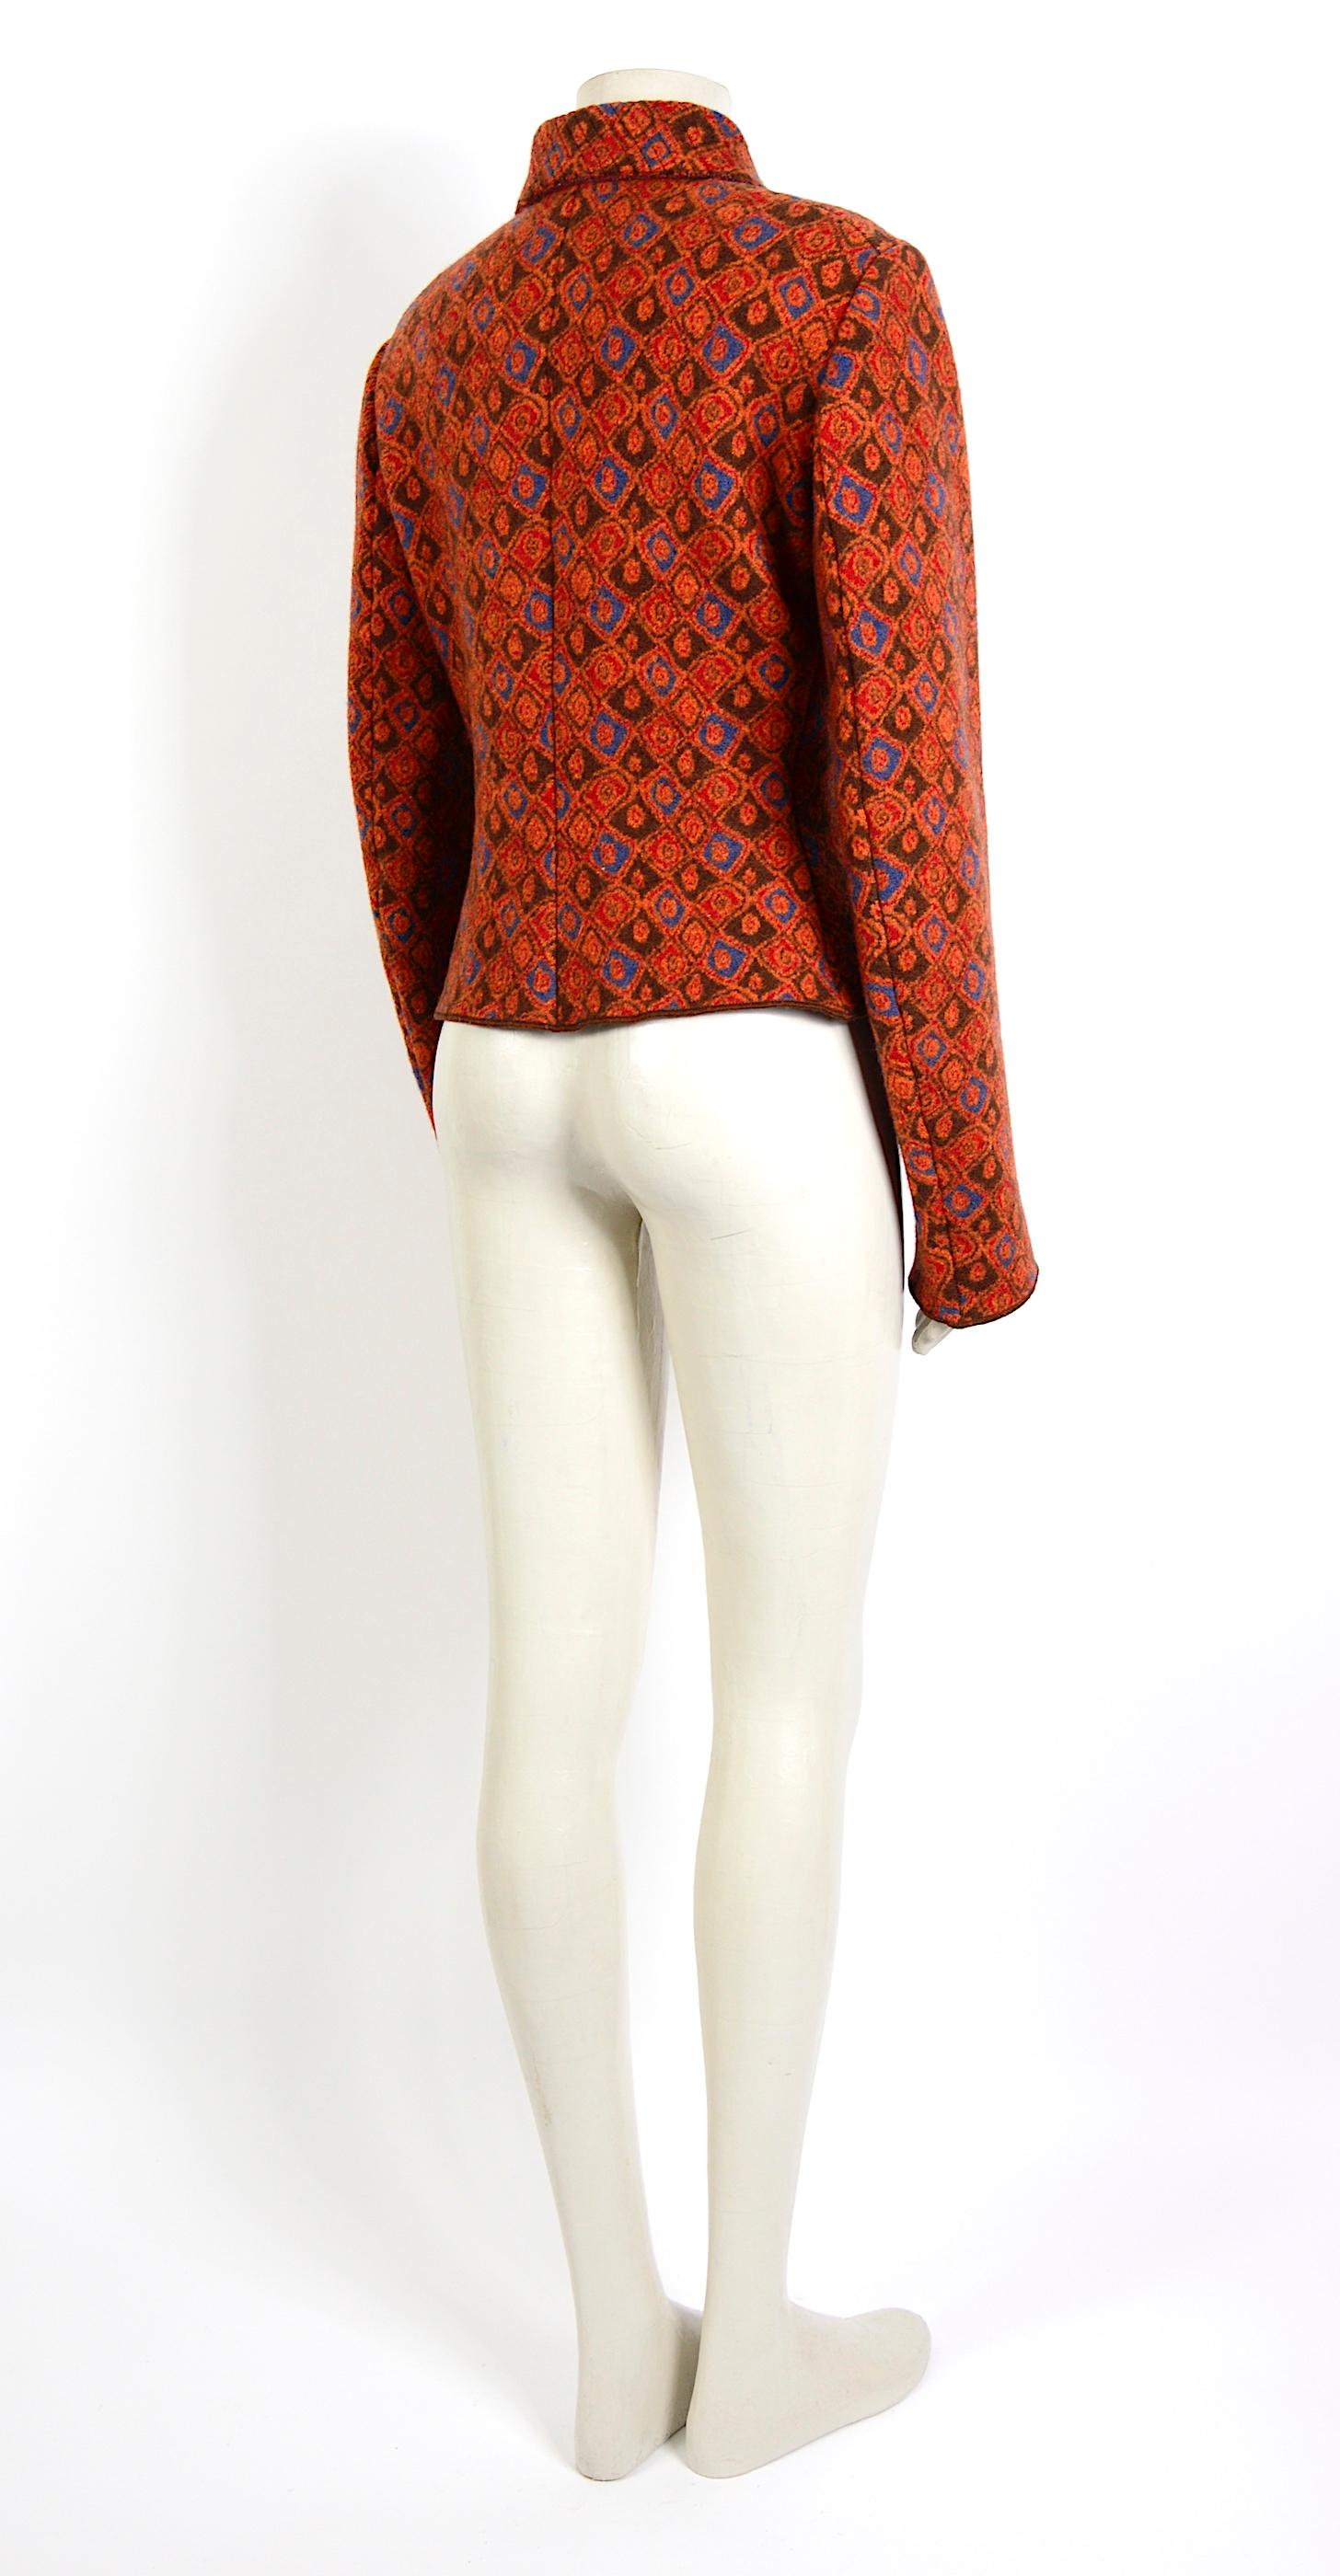 Azzedine Alaia collectors 1990s vintage wool rusted orange patterned jacket In Excellent Condition For Sale In Antwerpen, Vlaams Gewest